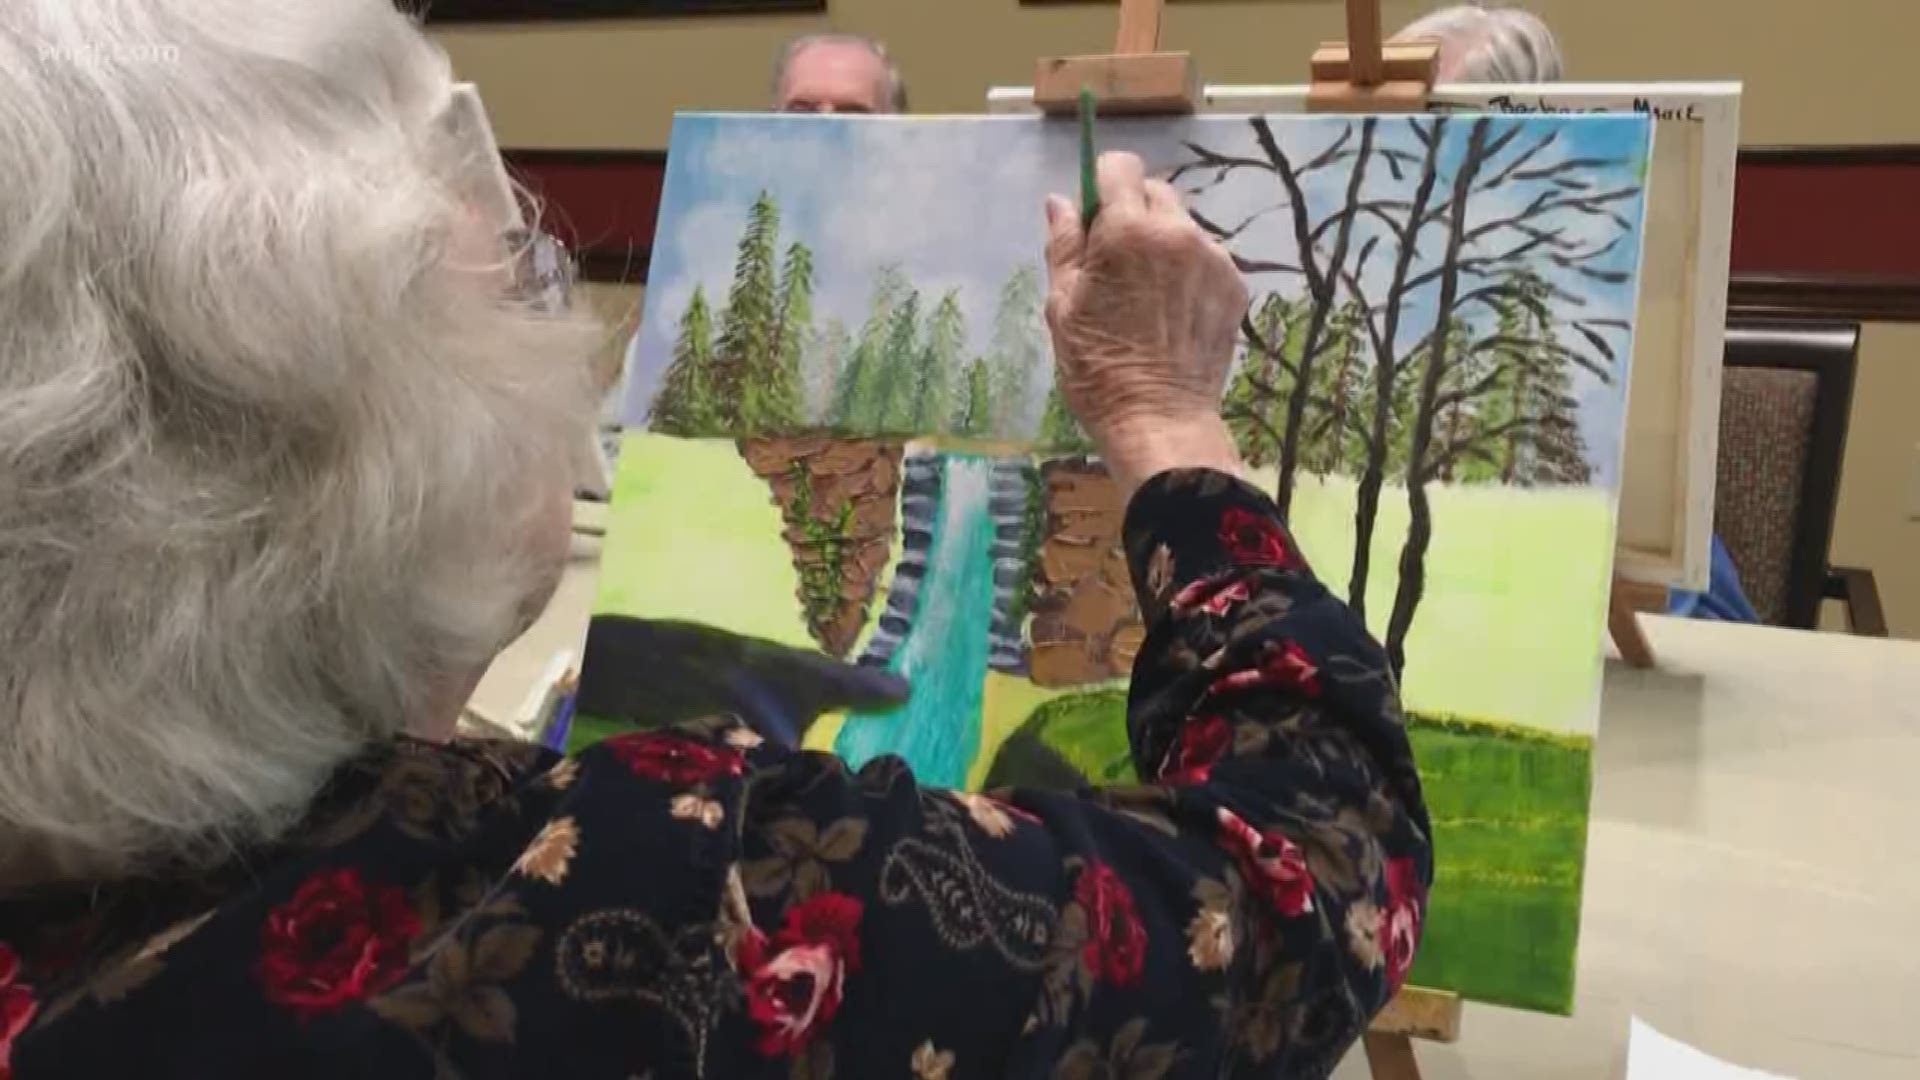 Atria Weston Place Senior Living holds an art class for residents. Some of the artists are in their nineties. They'll host an art show on March 14, 2019 at 6pm. It will feature wine, hors d'oeuvres and classical music.